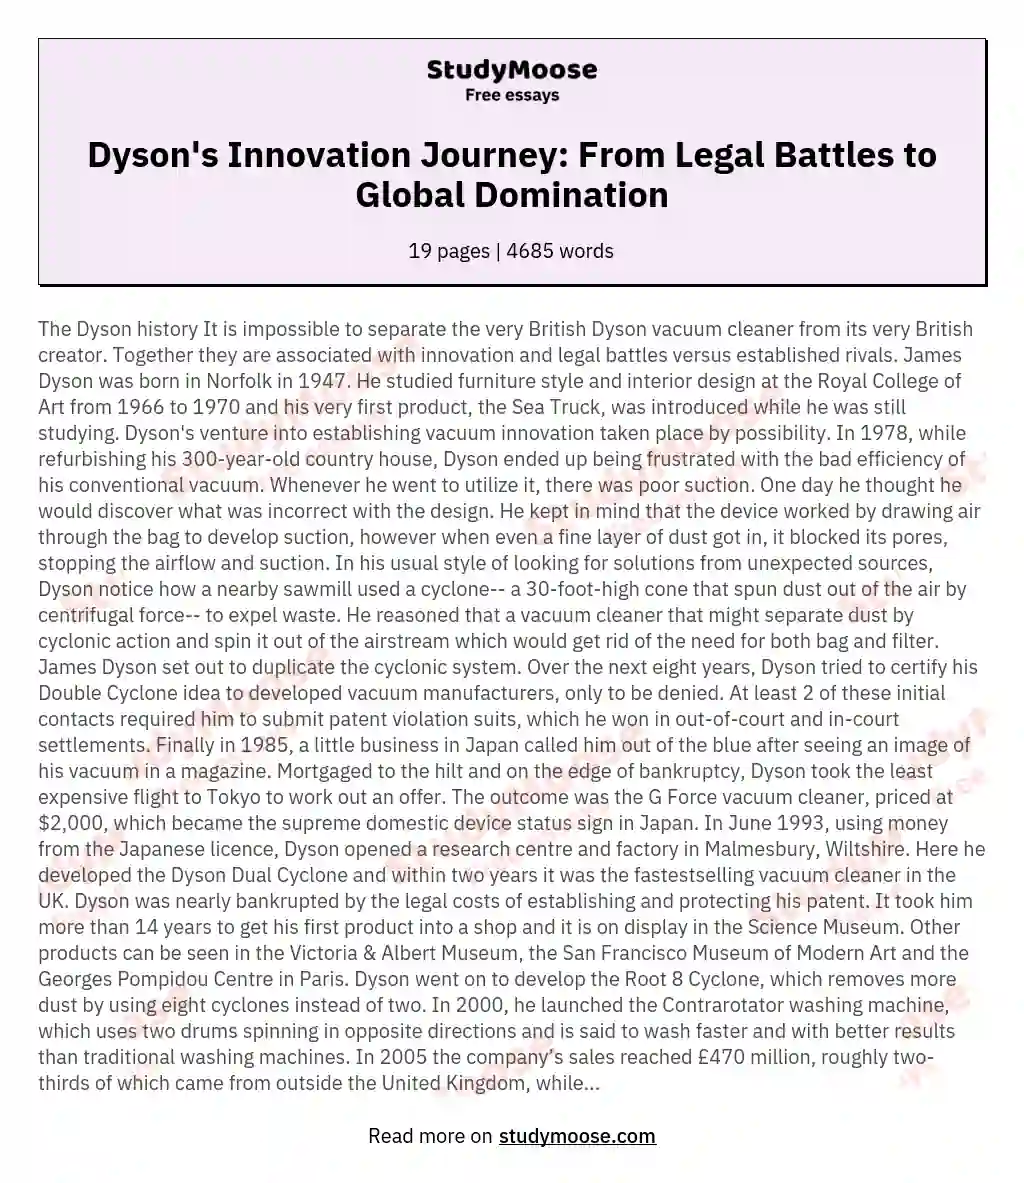 Dyson's Innovation Journey: From Legal Battles to Global Domination essay